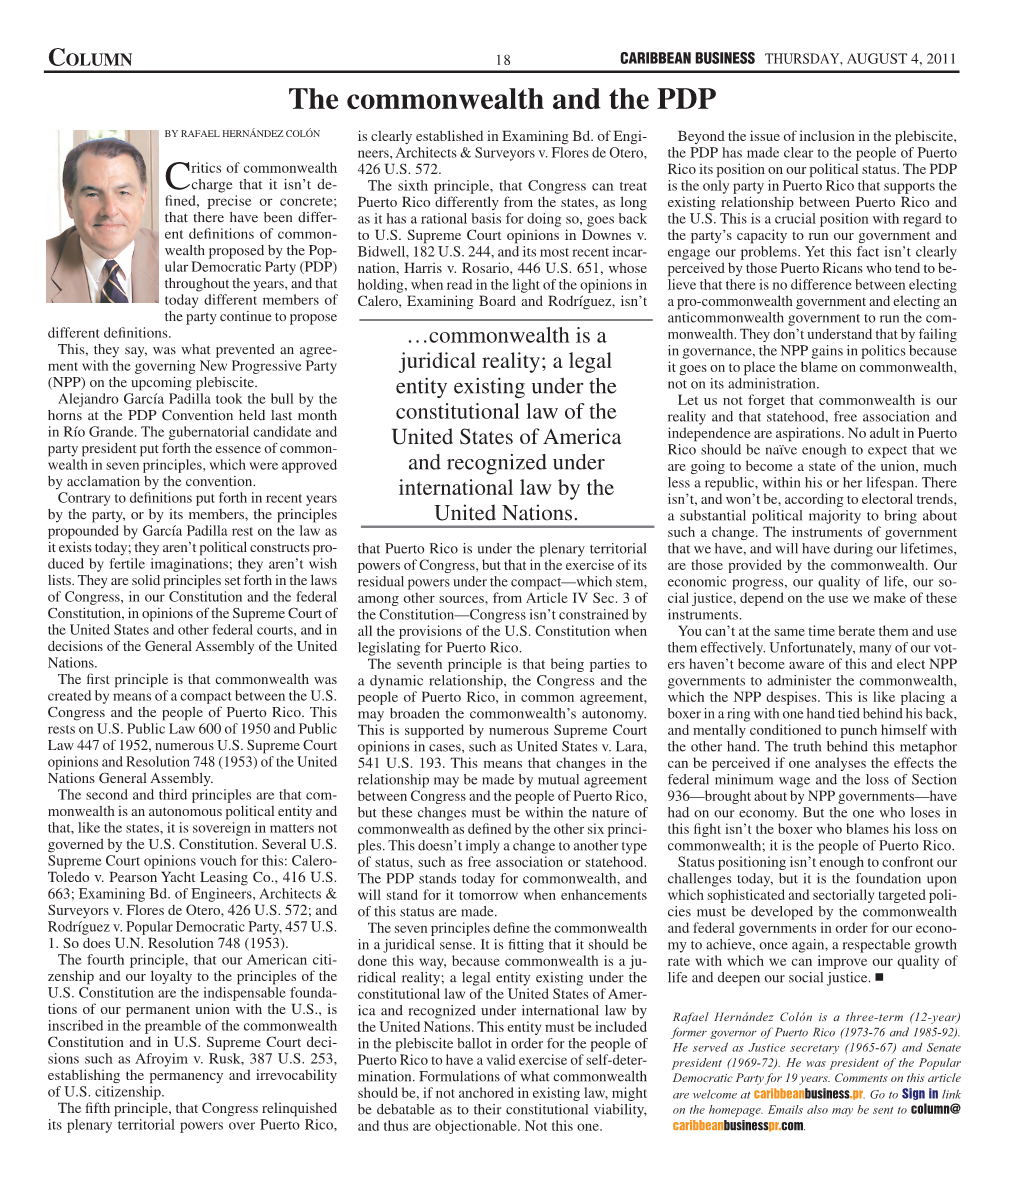 The Commonwealth and the PDP by RAFAEL HERNÁNDEZ COLÓN Is Clearly Established in Examining Bd